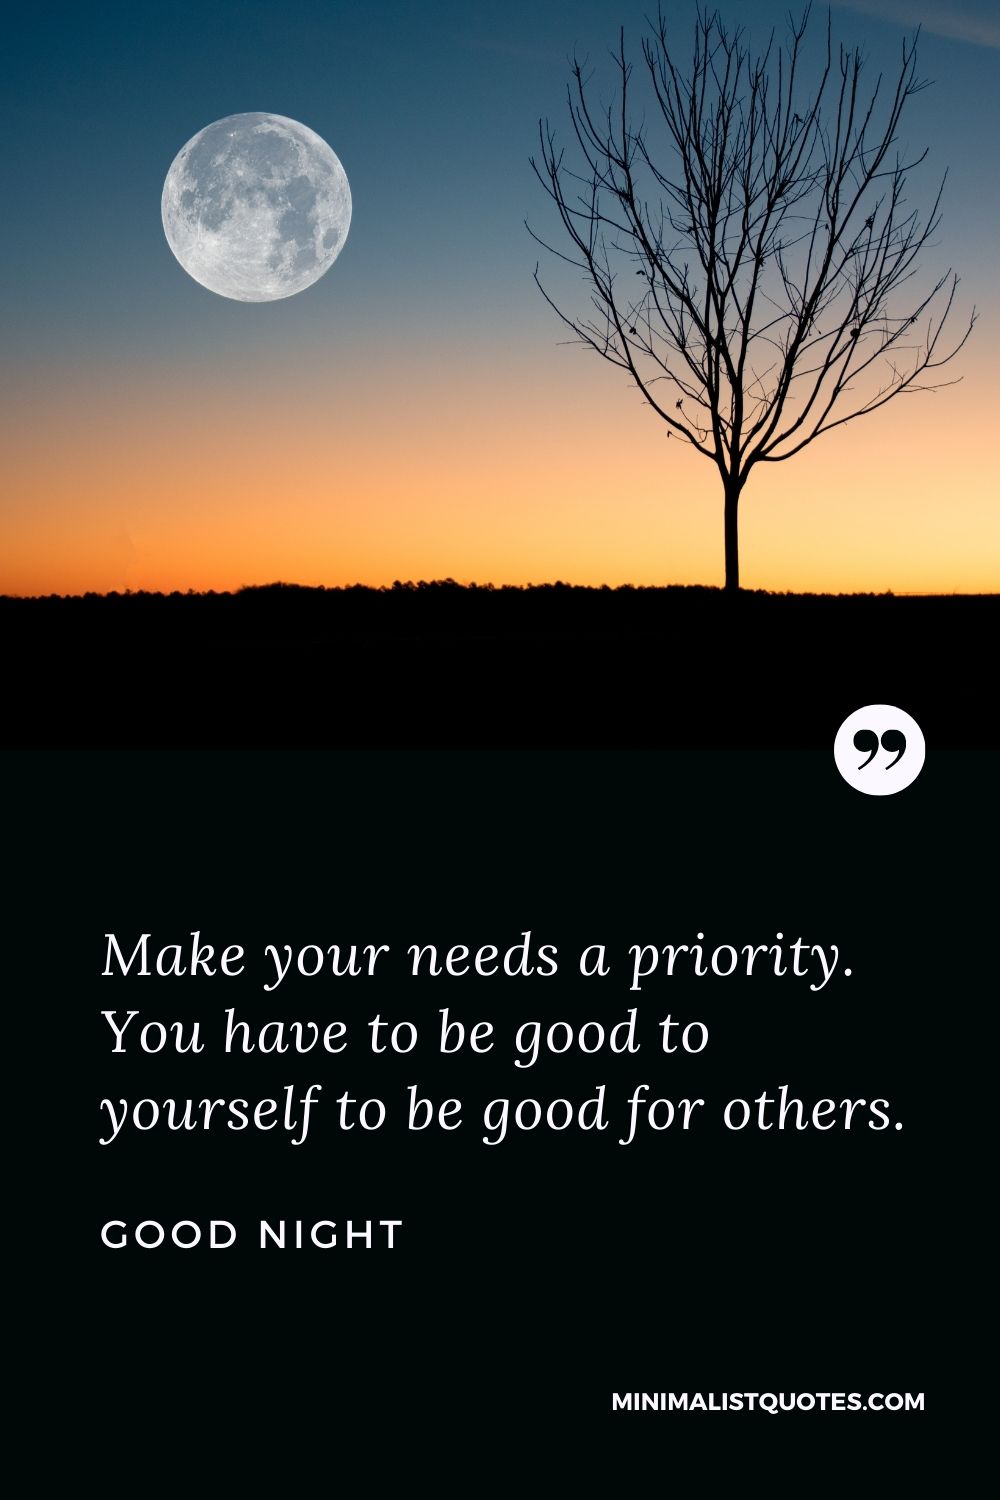 Good Night Wishes - Make your needs a priority. You have to be good to yourself to be good for others.